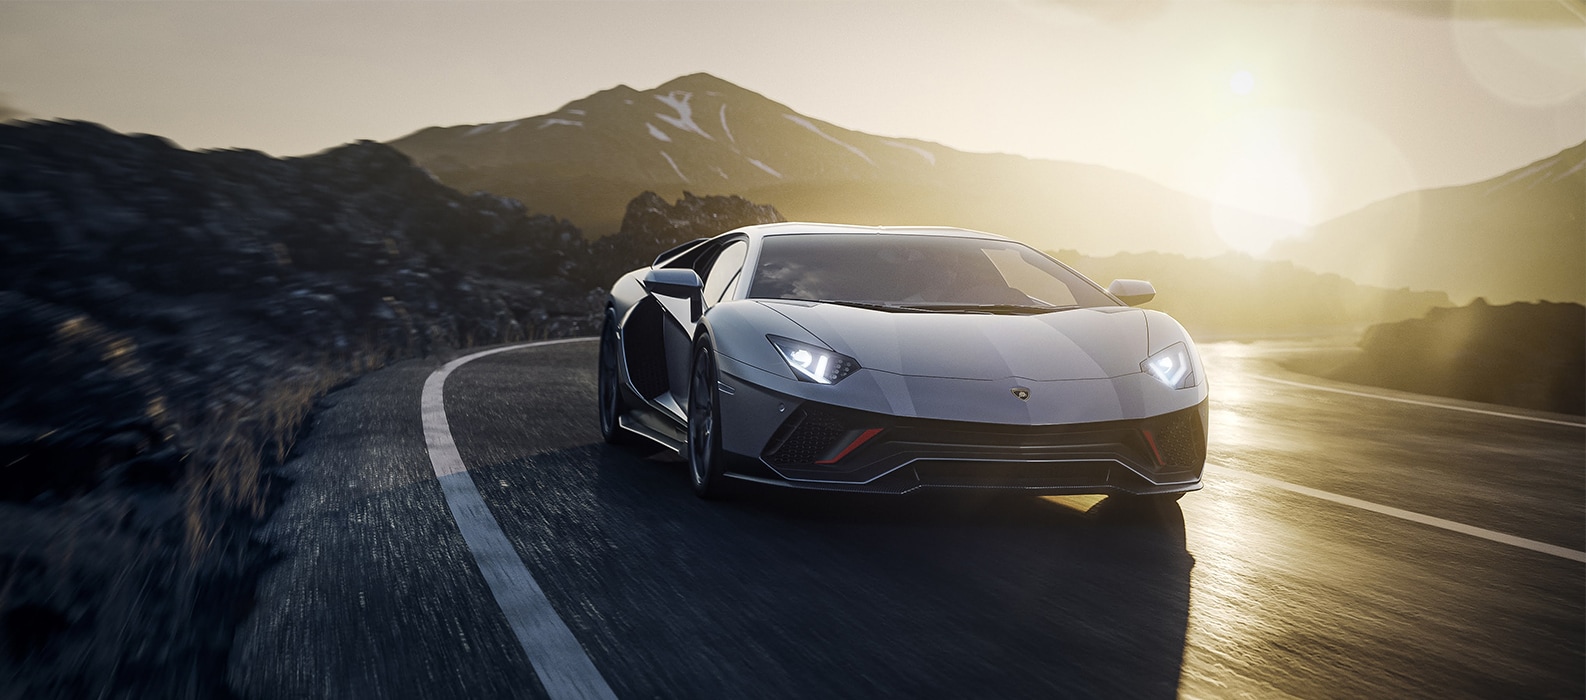 Aventador LP 780-4 Ultimae: it takes time to become timeless